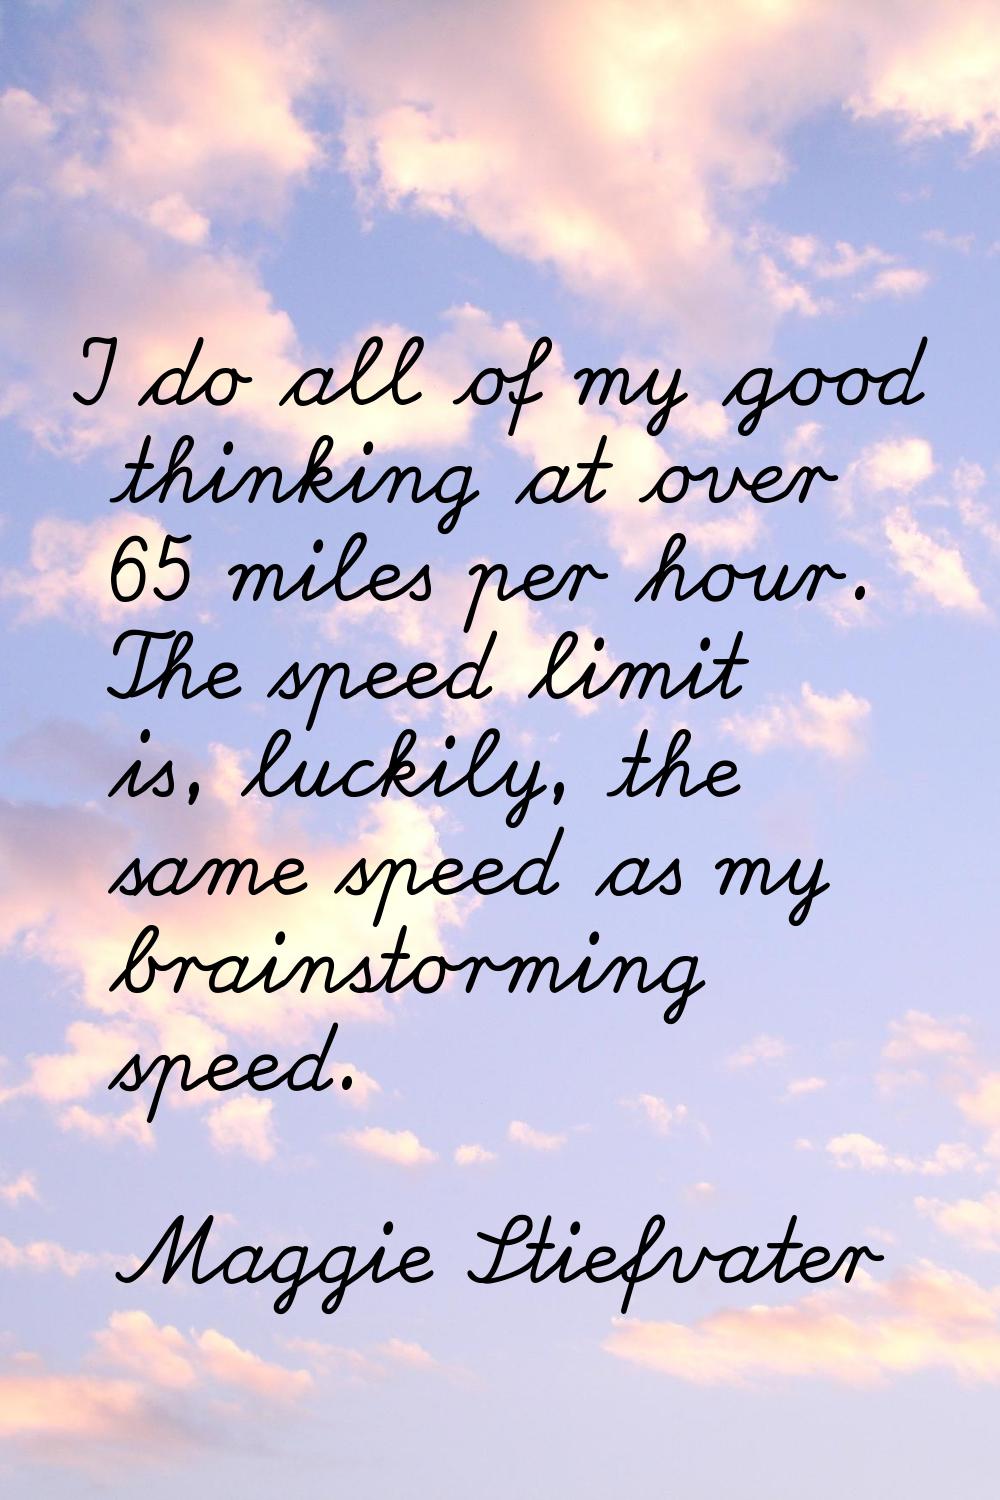 I do all of my good thinking at over 65 miles per hour. The speed limit is, luckily, the same speed